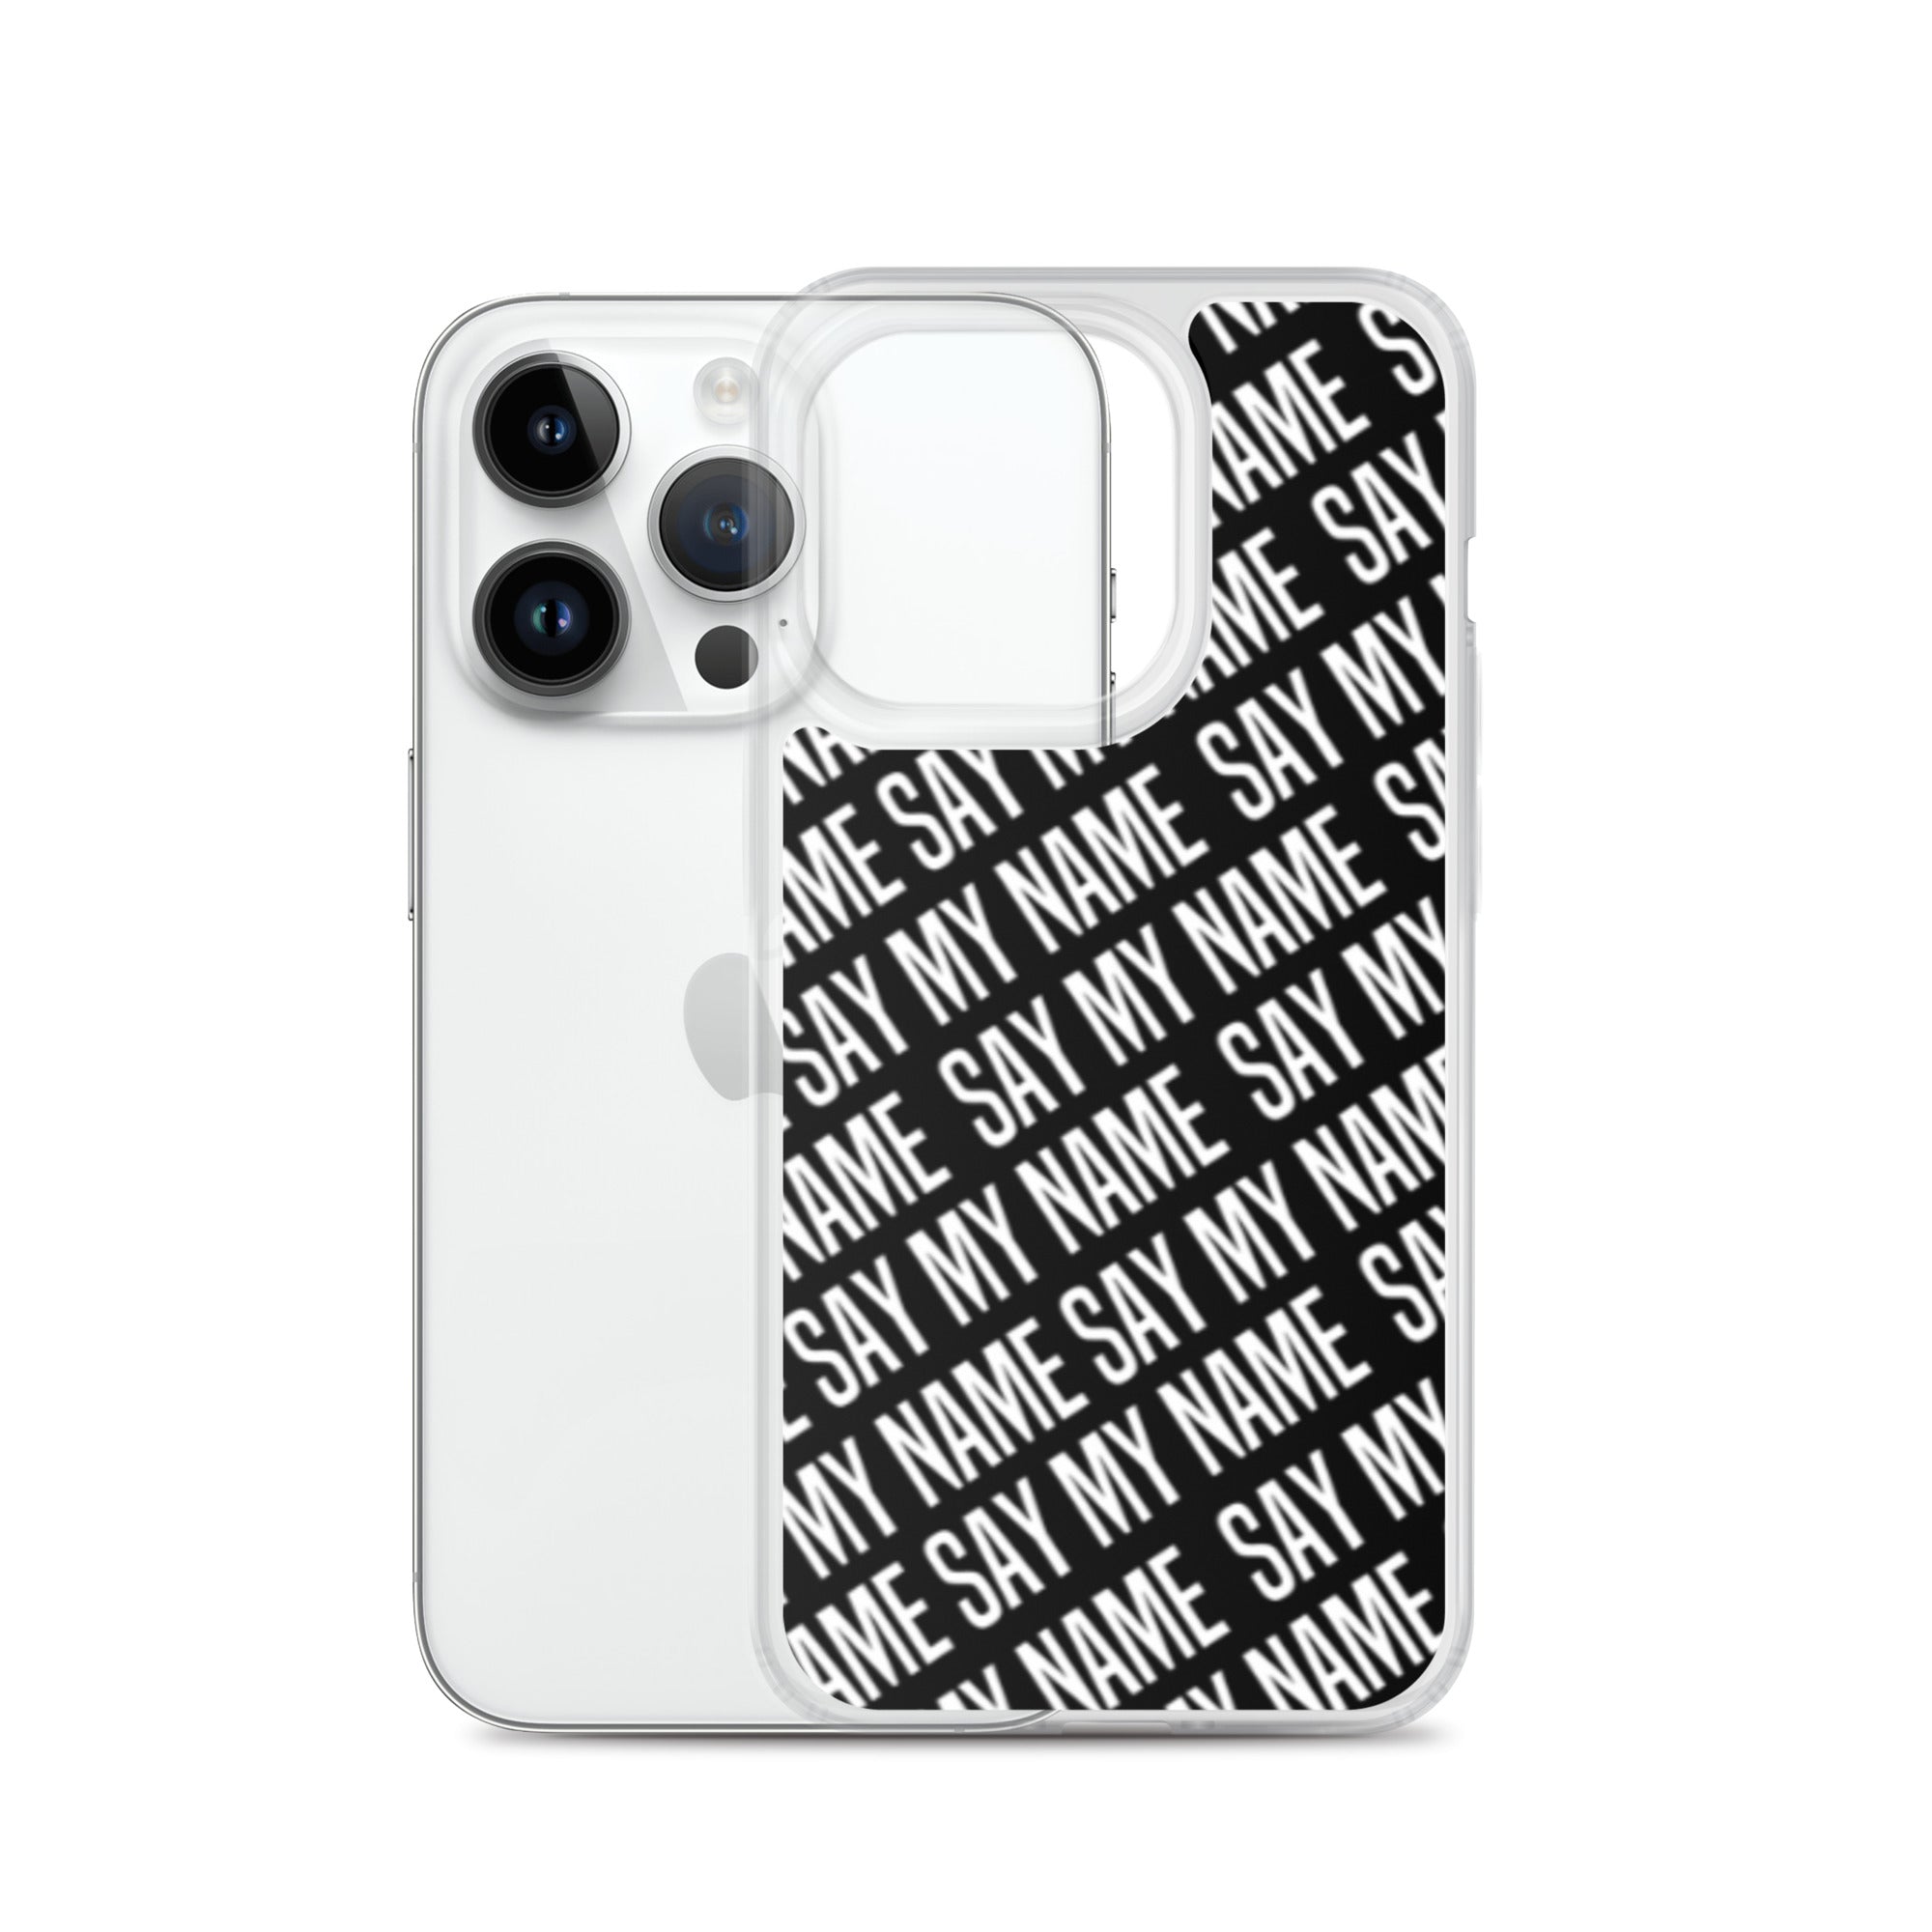 SAY MY NAME iPhone case